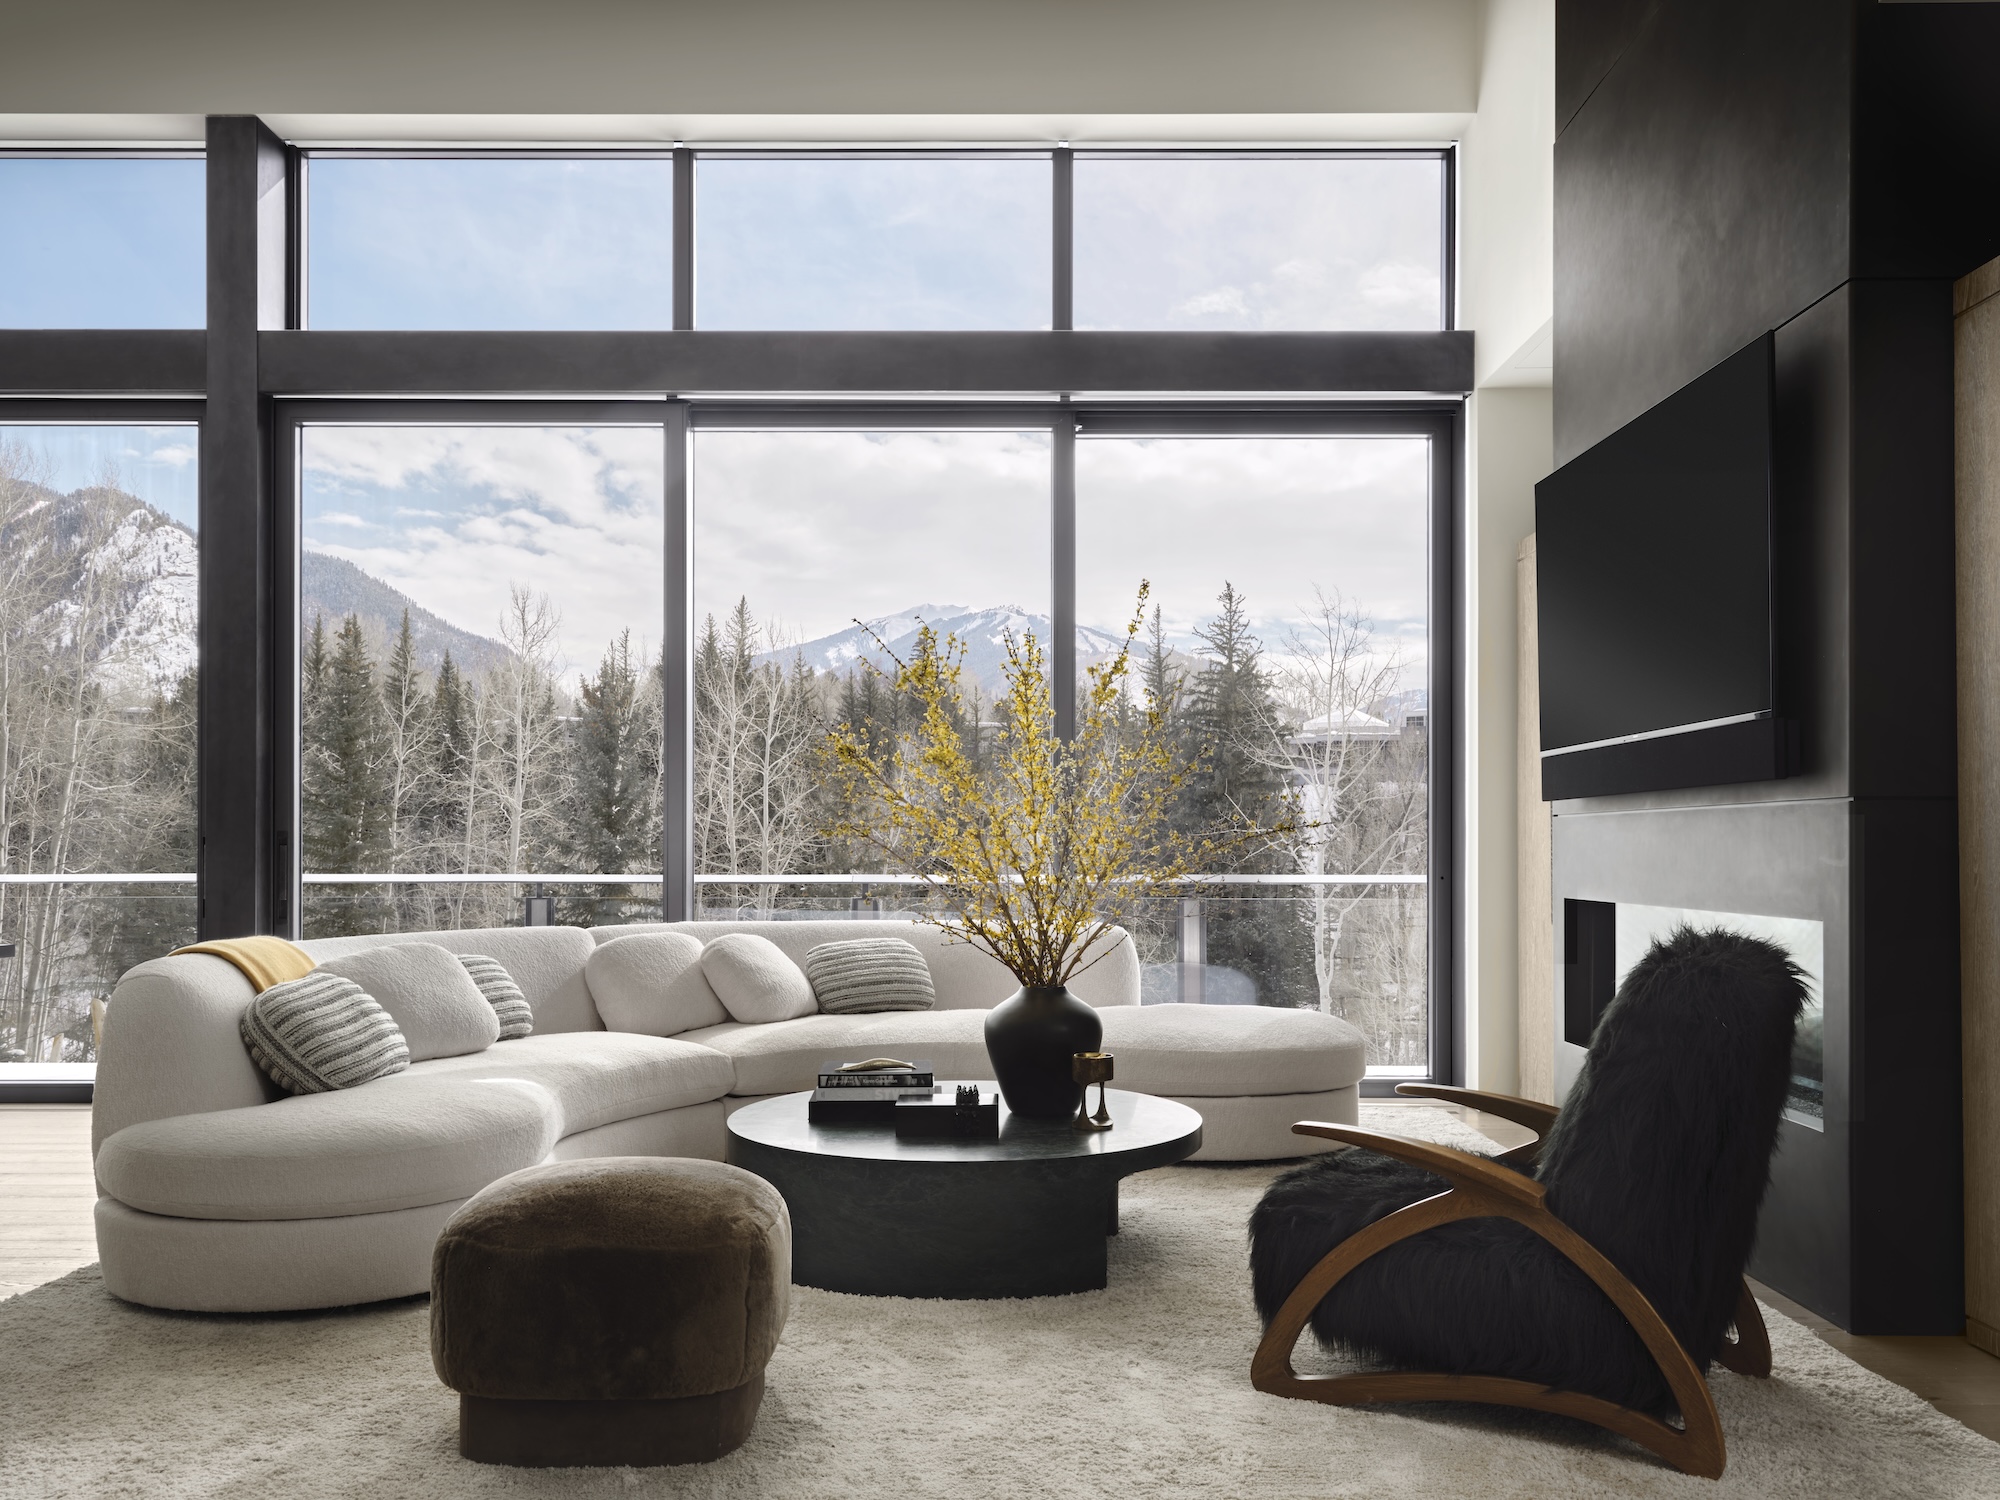 a view of the living room through the windows at aspen modern